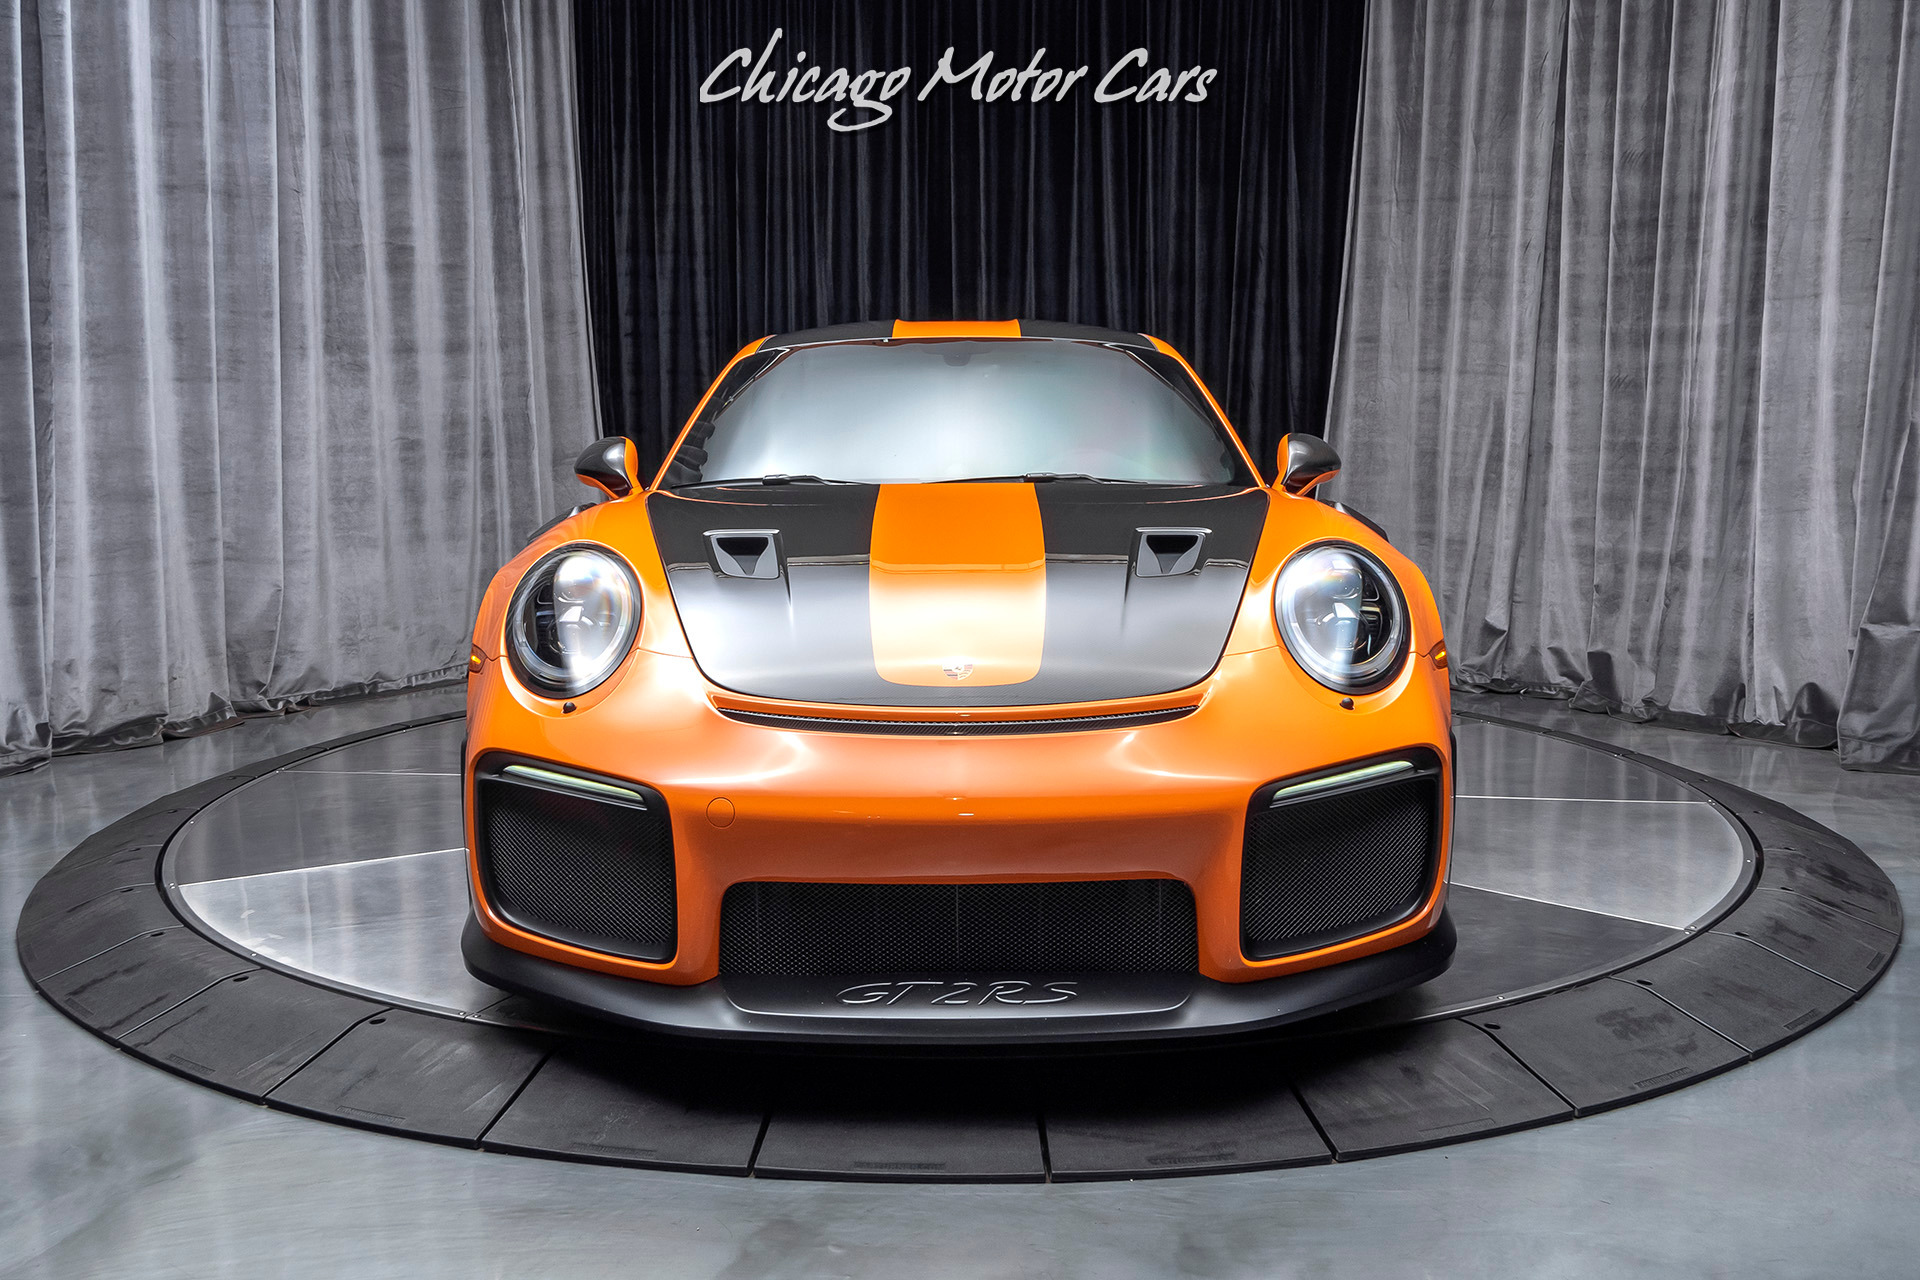 Used-2019-Porsche-911-GT2-RS-Coupe-Original-MSRP-365K-WEISSACH-PACKAGE-SPECIAL-WISH-TAILORING